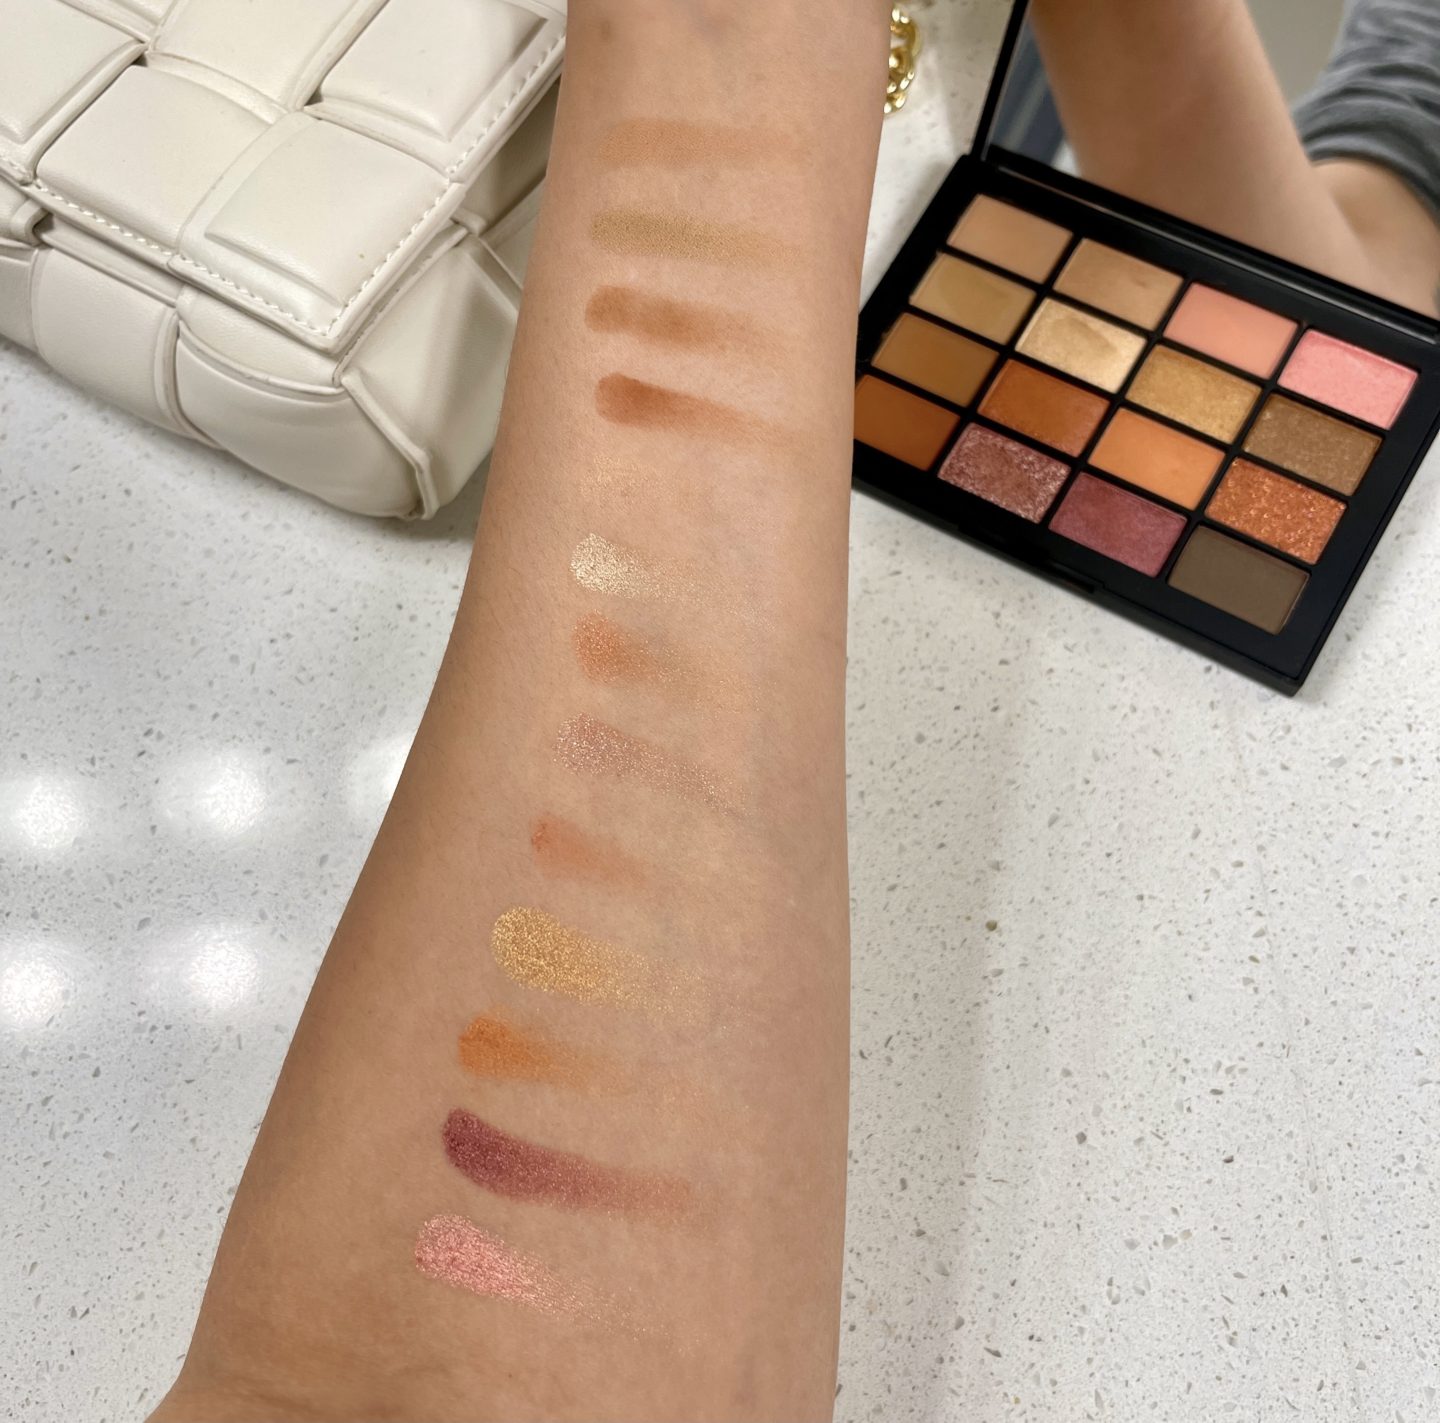 NARS Summer Unrated Eyeshadow Palette Review The Daily True